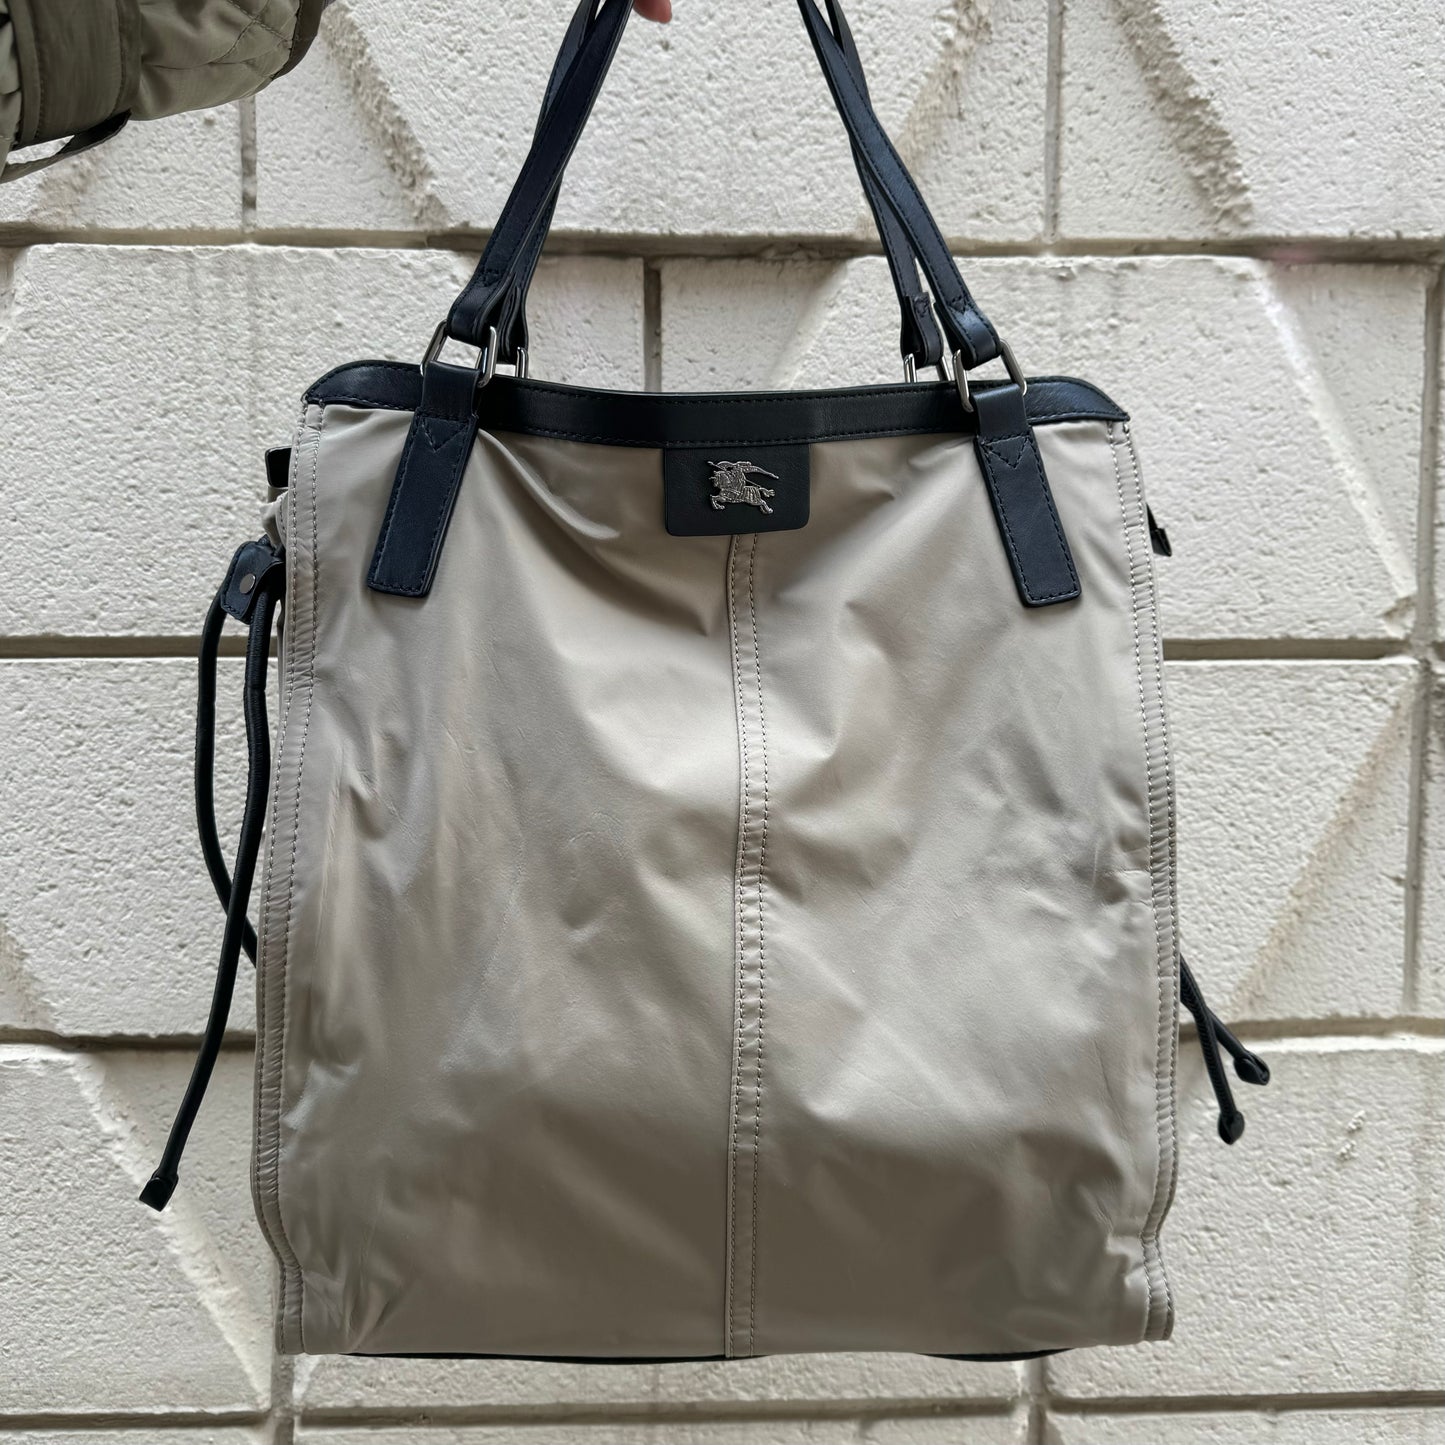 Burberry Buckleigh Tote Bag